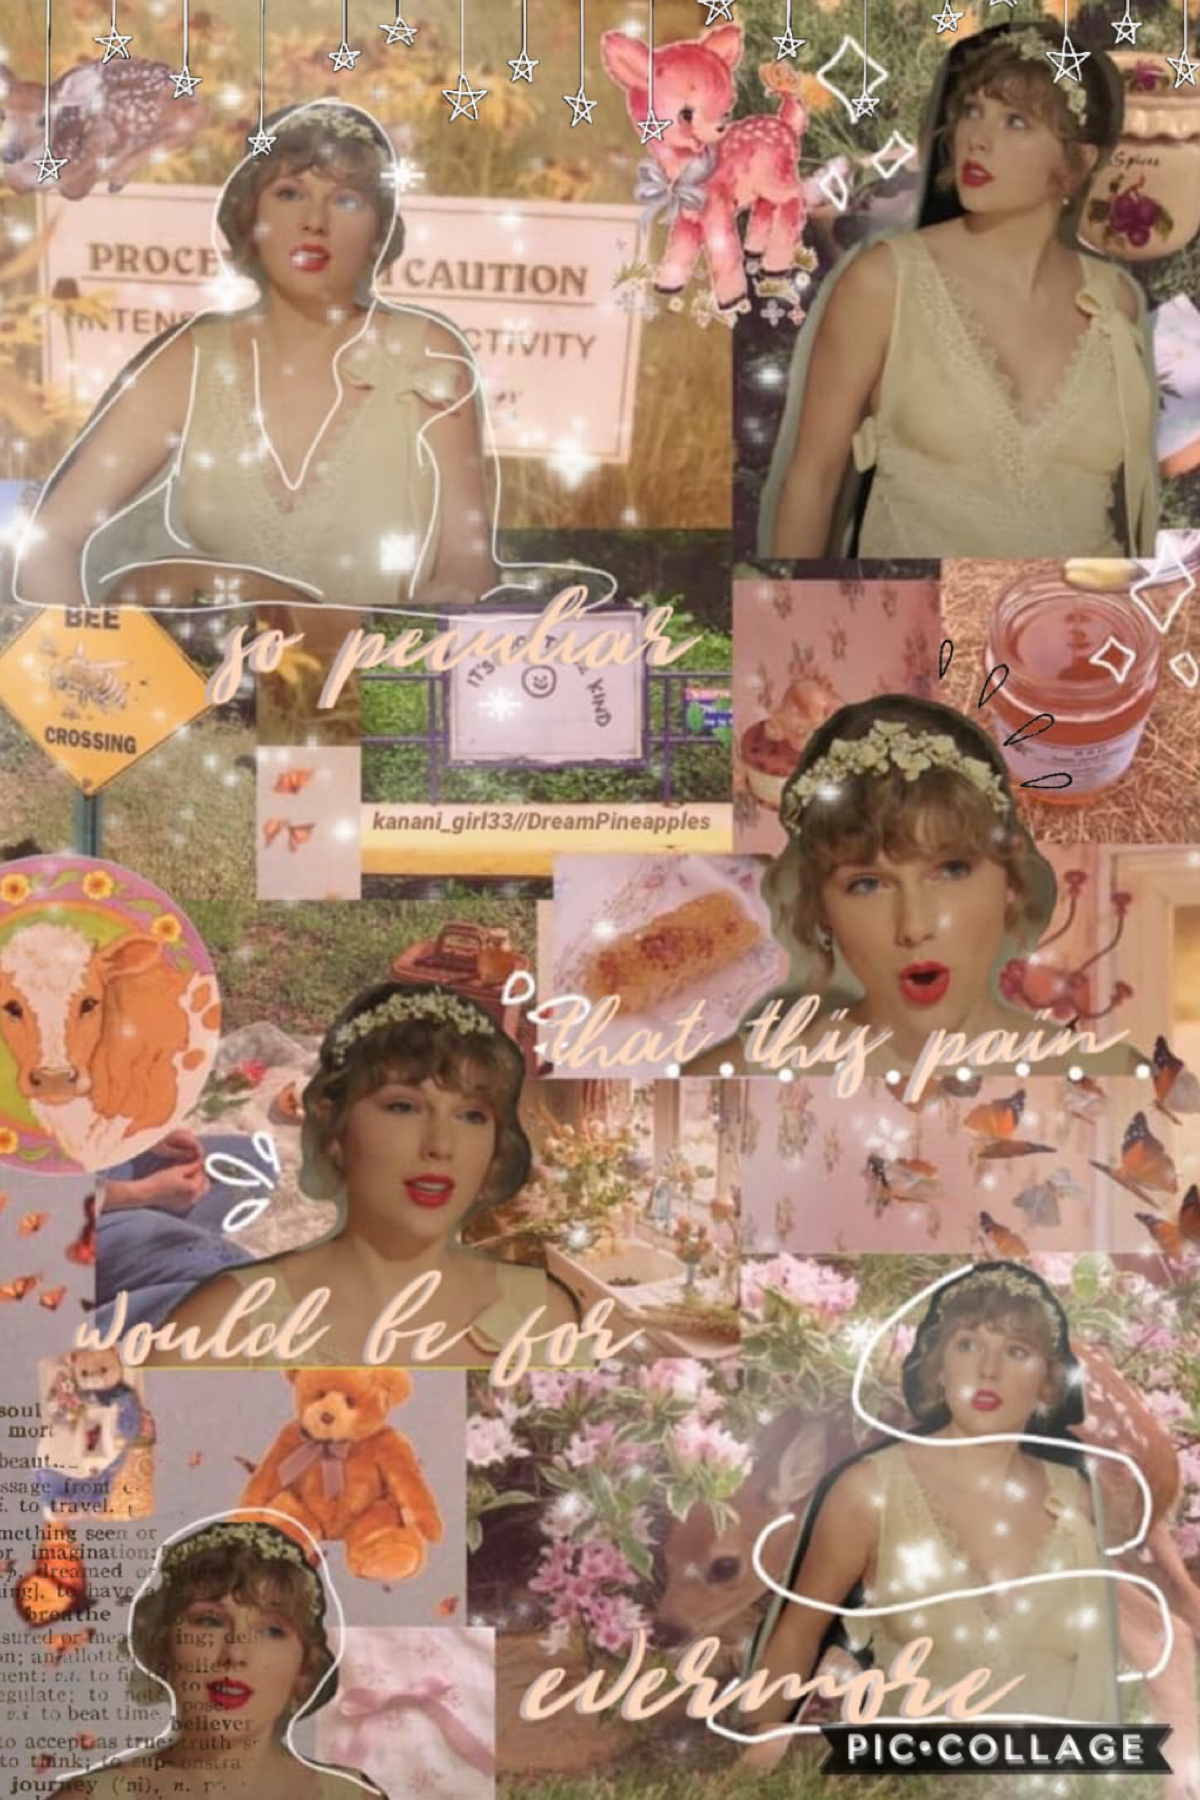 ☁️ T A P ☁️
collab with kanani_girl33 i love her sm y’all she’s actually the bestest person ever!!! i did bg she did text :)
qotd: fav song(s) on evermore
aotd: champagne problems or gold rush!!
december 13, 2020